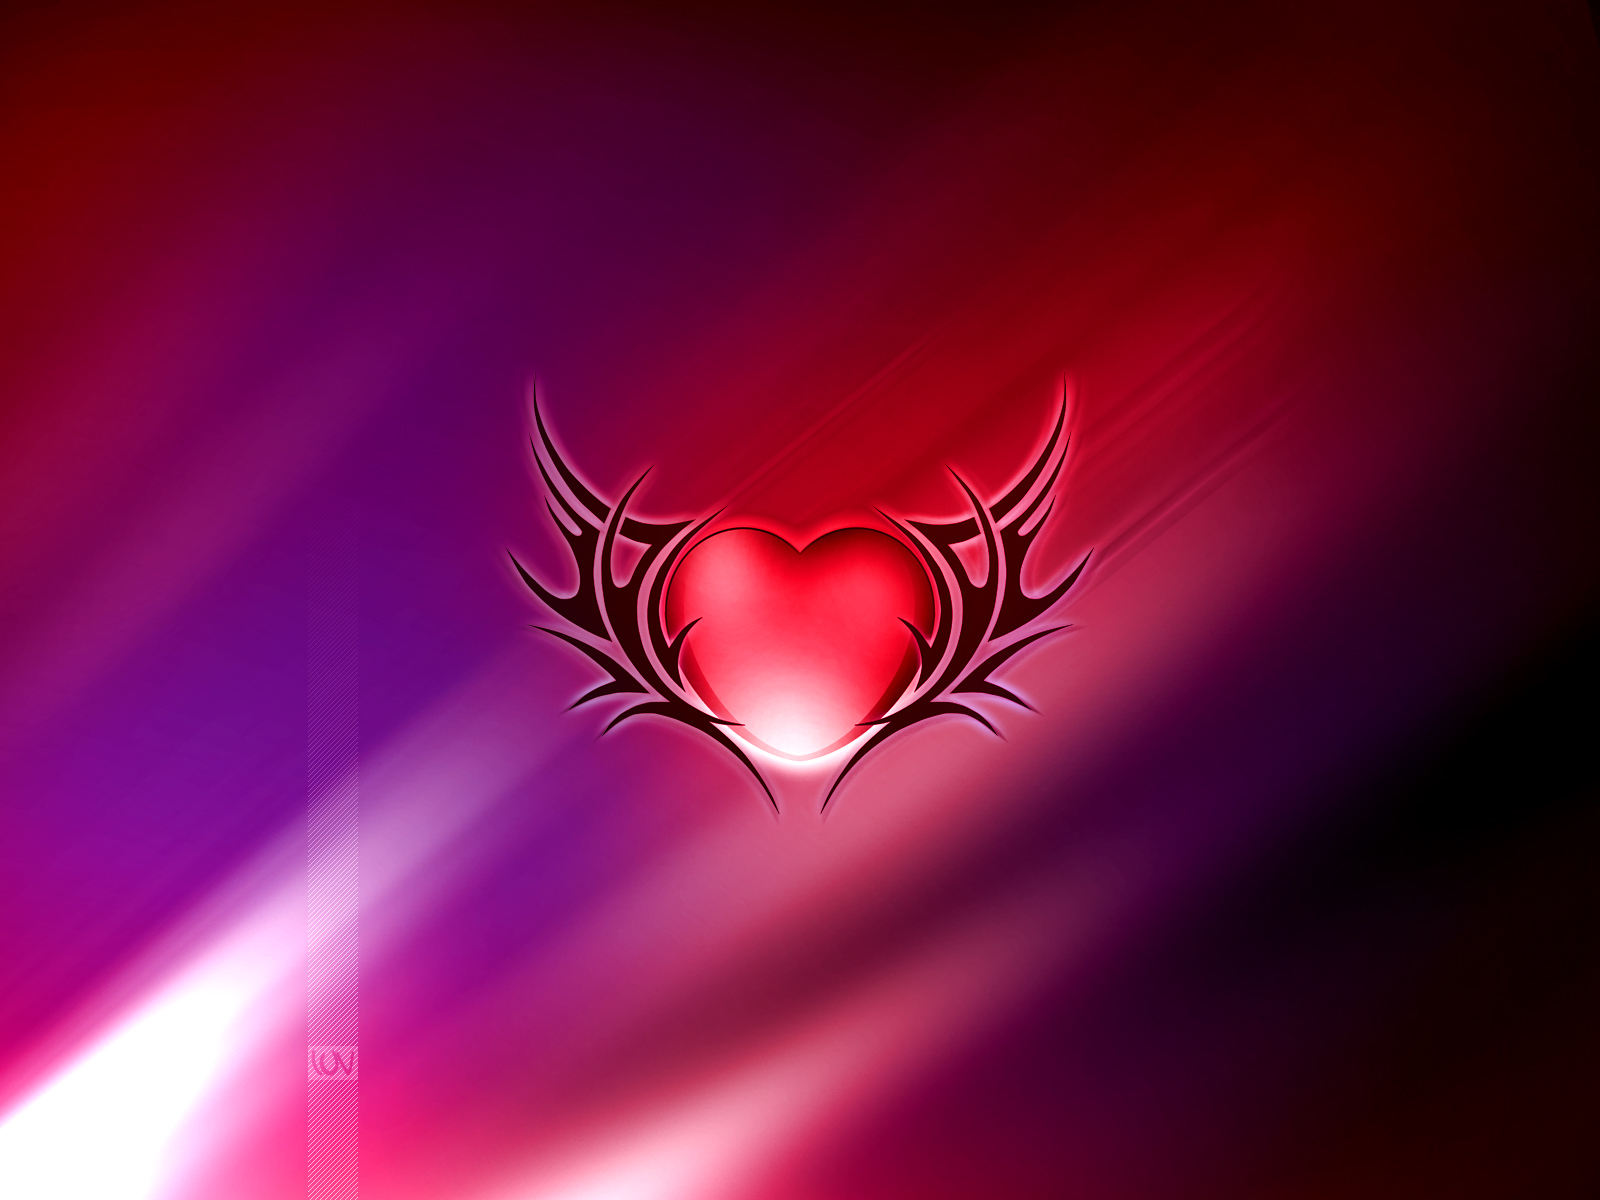 Red Heart With Black Wings Full 1080p Ultra HD Wallpaper